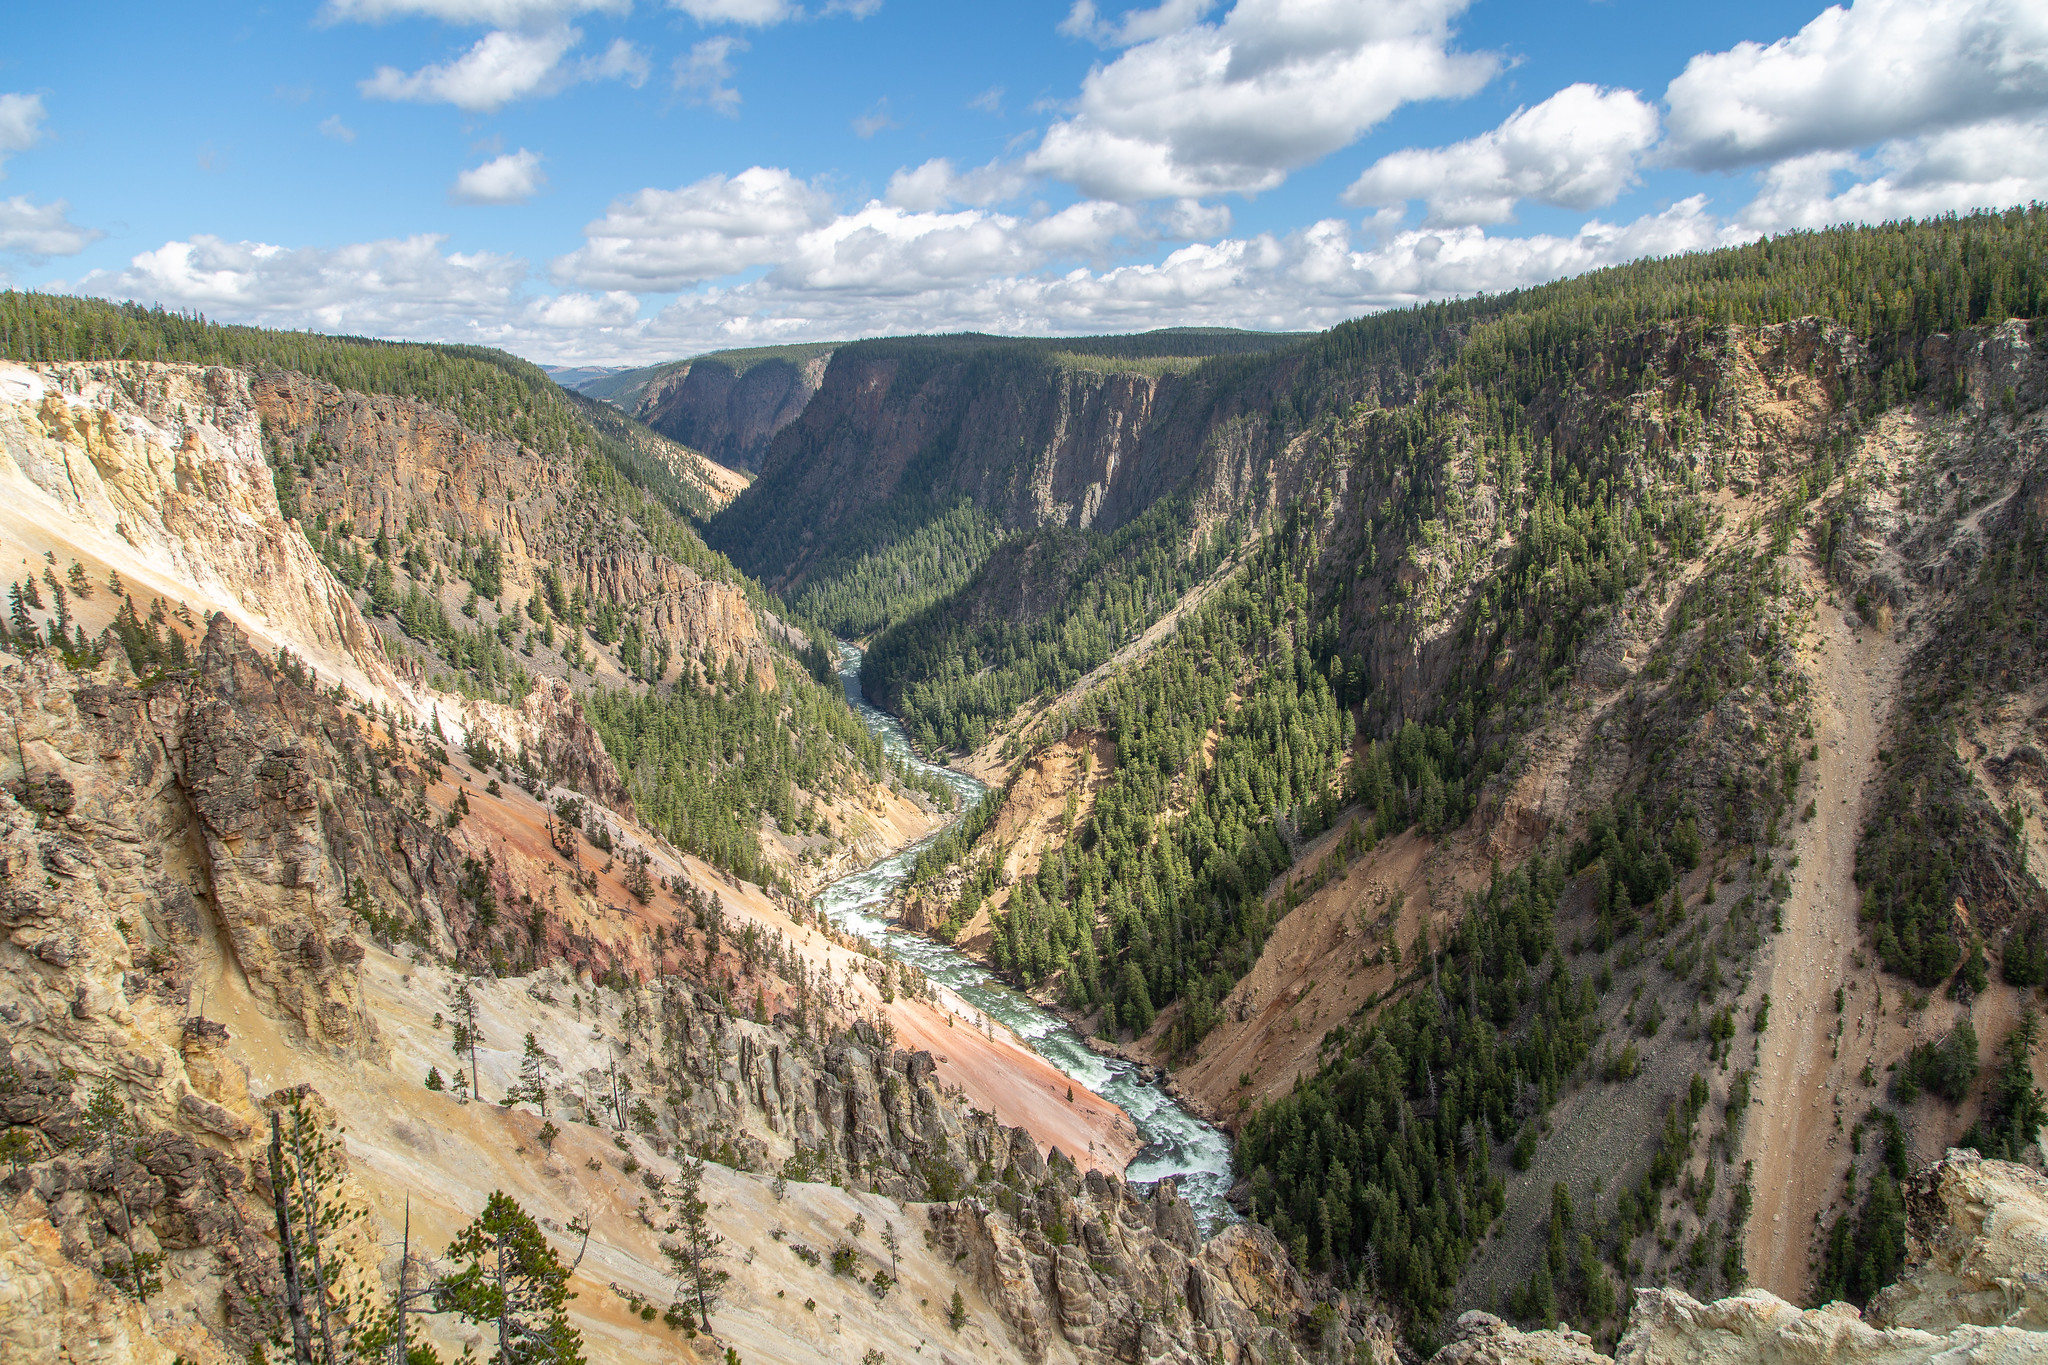 Where to See Forever: Most Scenic Spots in Yellowstone